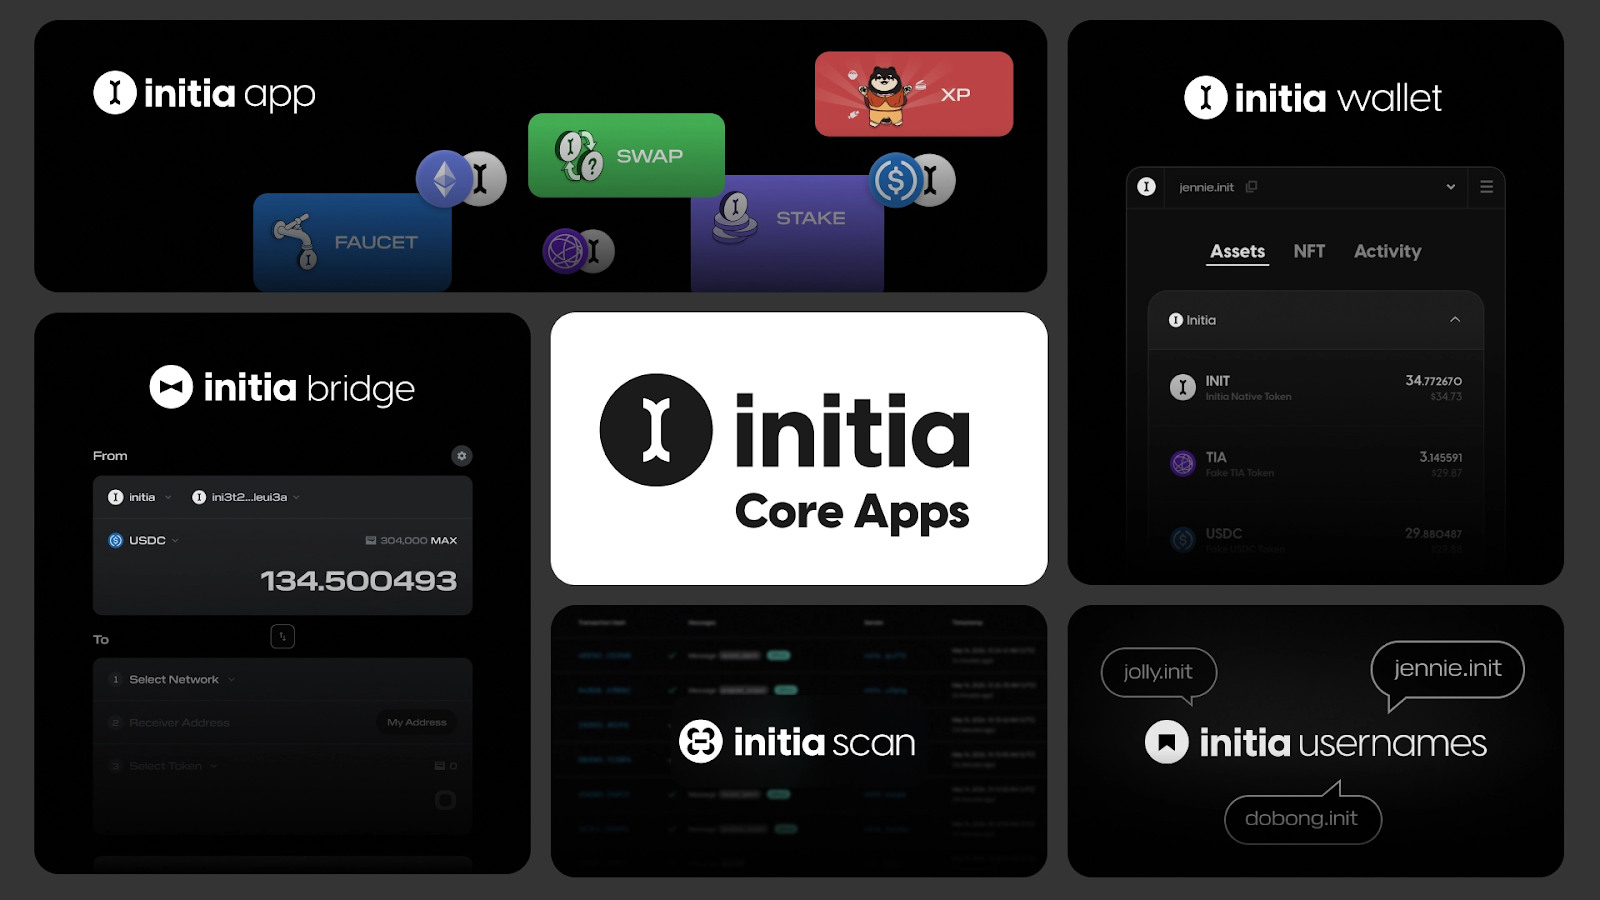 Initia Core Apps include the Initia App (which constitutes the InitiaDEX, a testnet token faucet, and staking functionality), the Initia Wallet, Inita Usernames, the Initia Bridge, and several other dApps. These applications are designed to be user-friendly, secure, and interactive and are critical to the continued success of Initia moving forward. (Image Credit: What is the INIT token? Layer 1 on Cosmos Initia via the Coinbay)